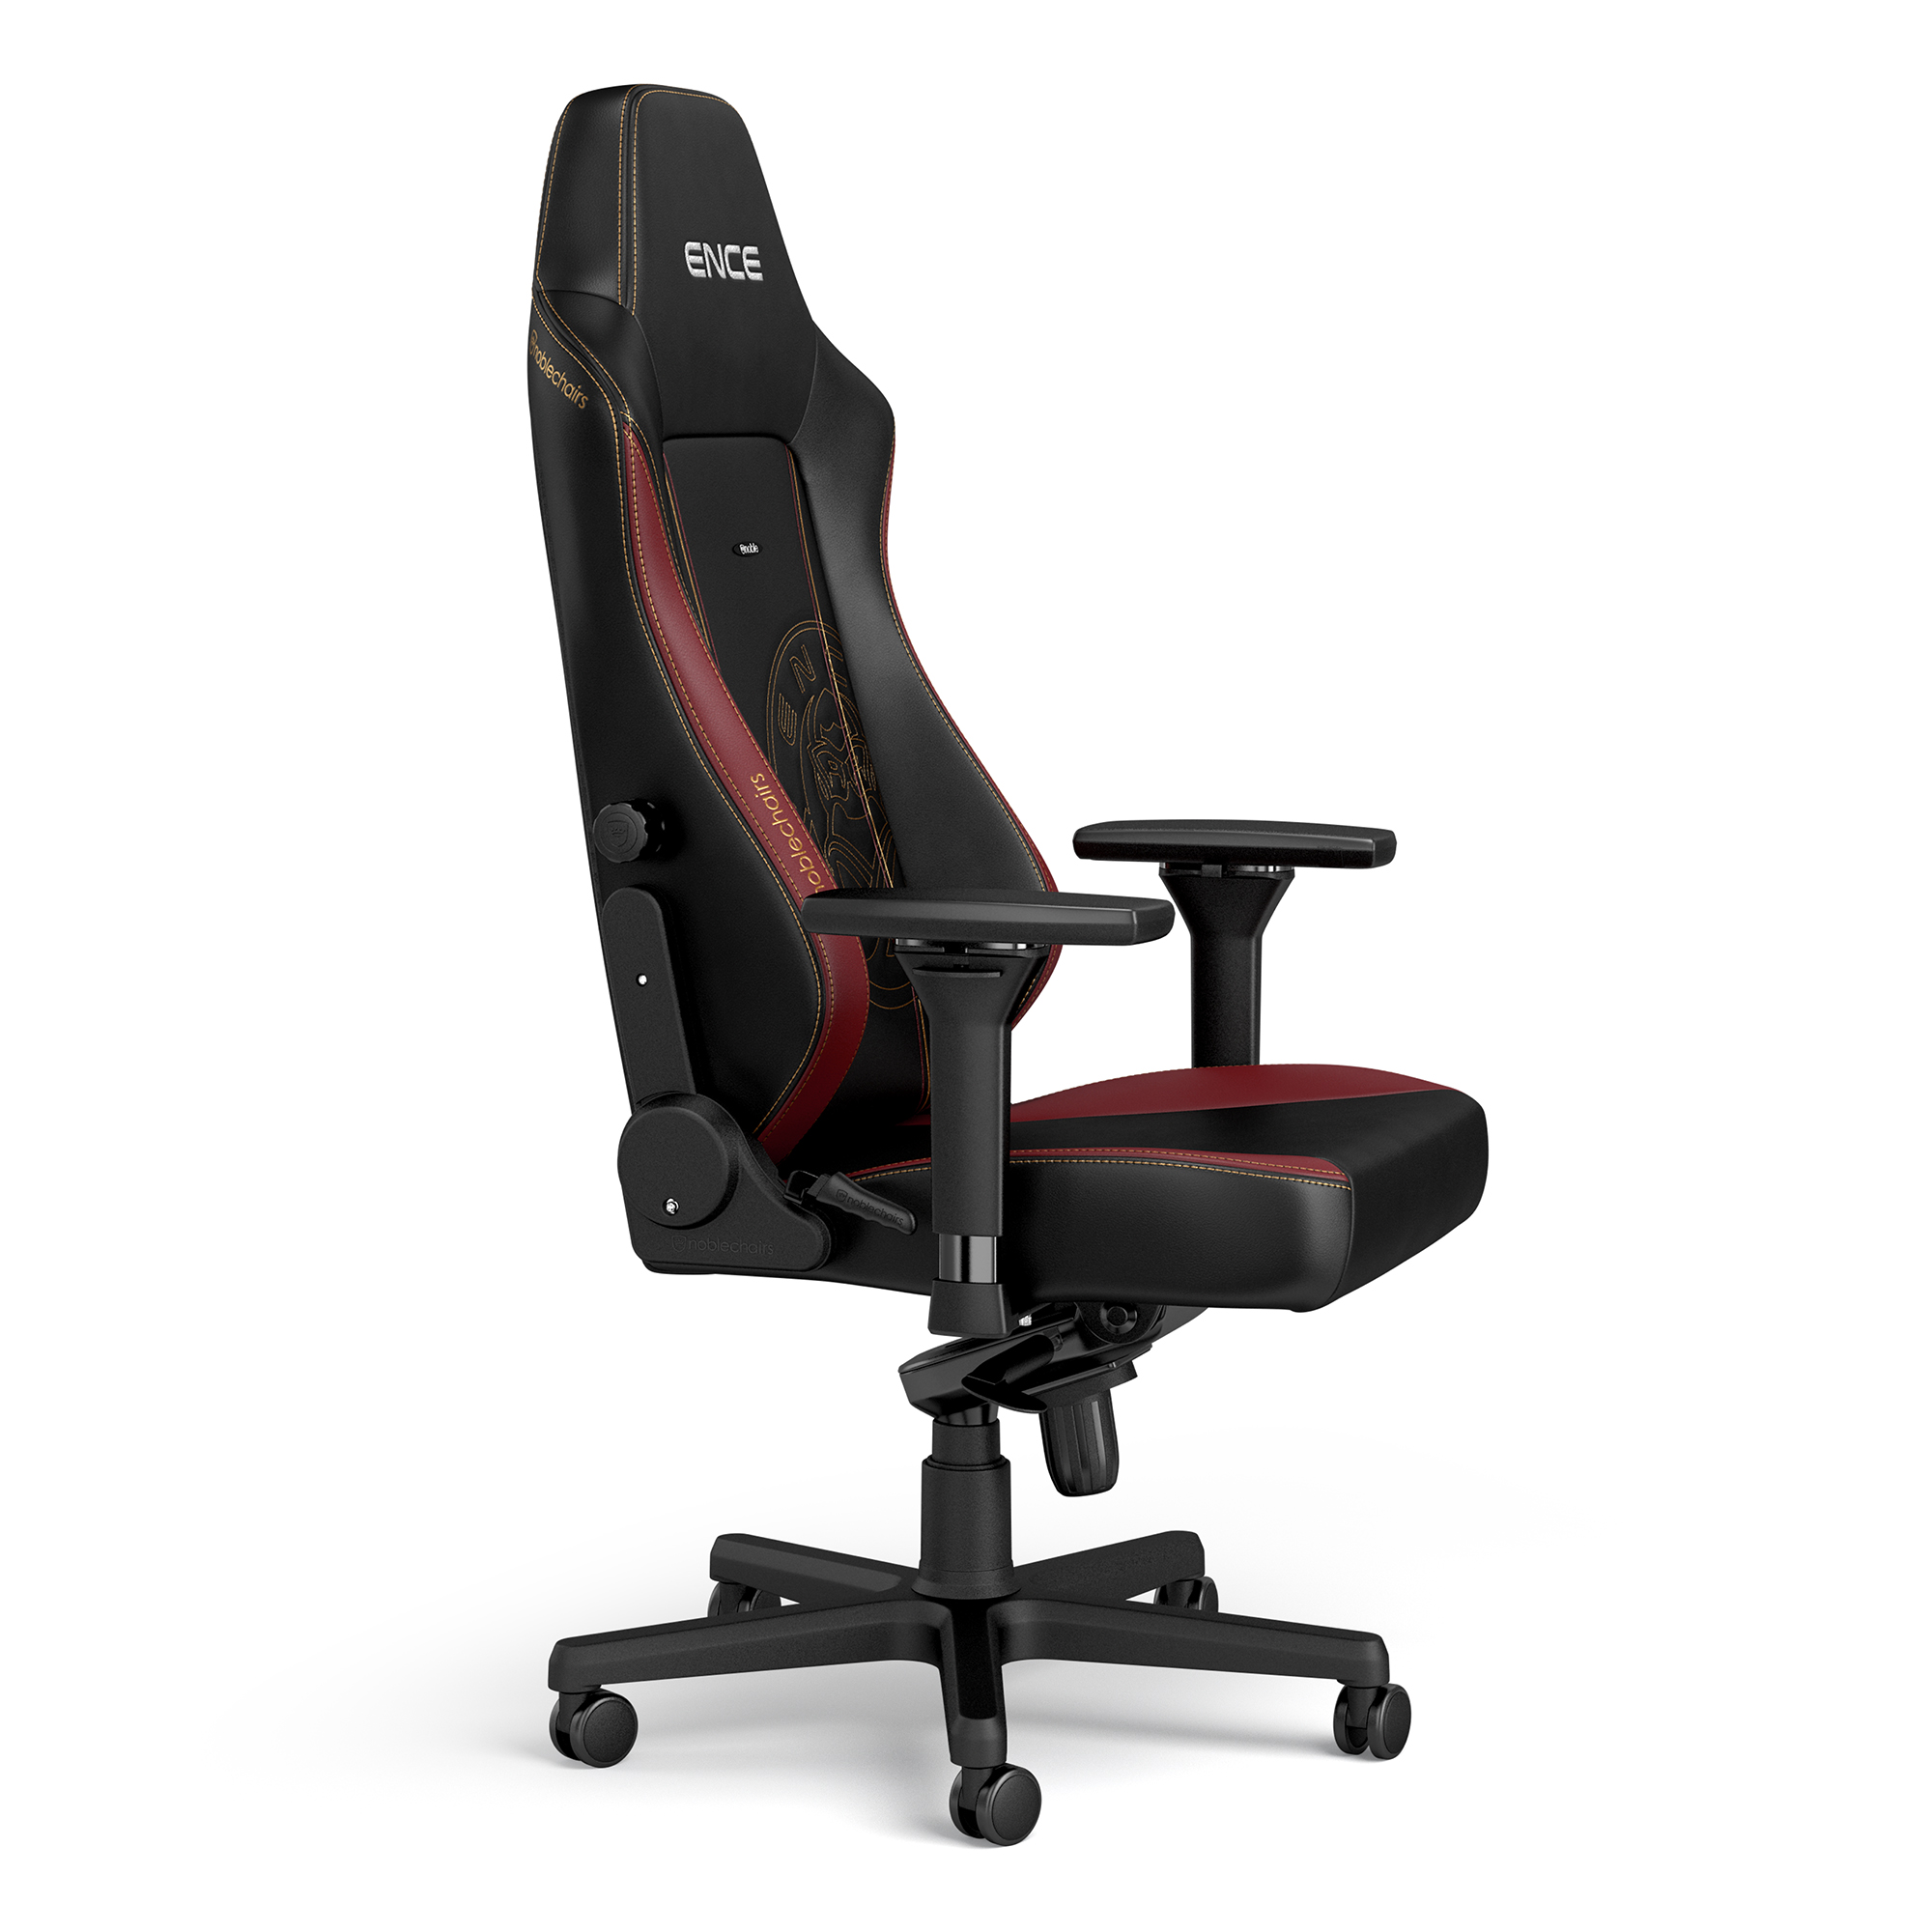 noblechairs - noblechairs HERO Gaming Chair - ENCE Edition